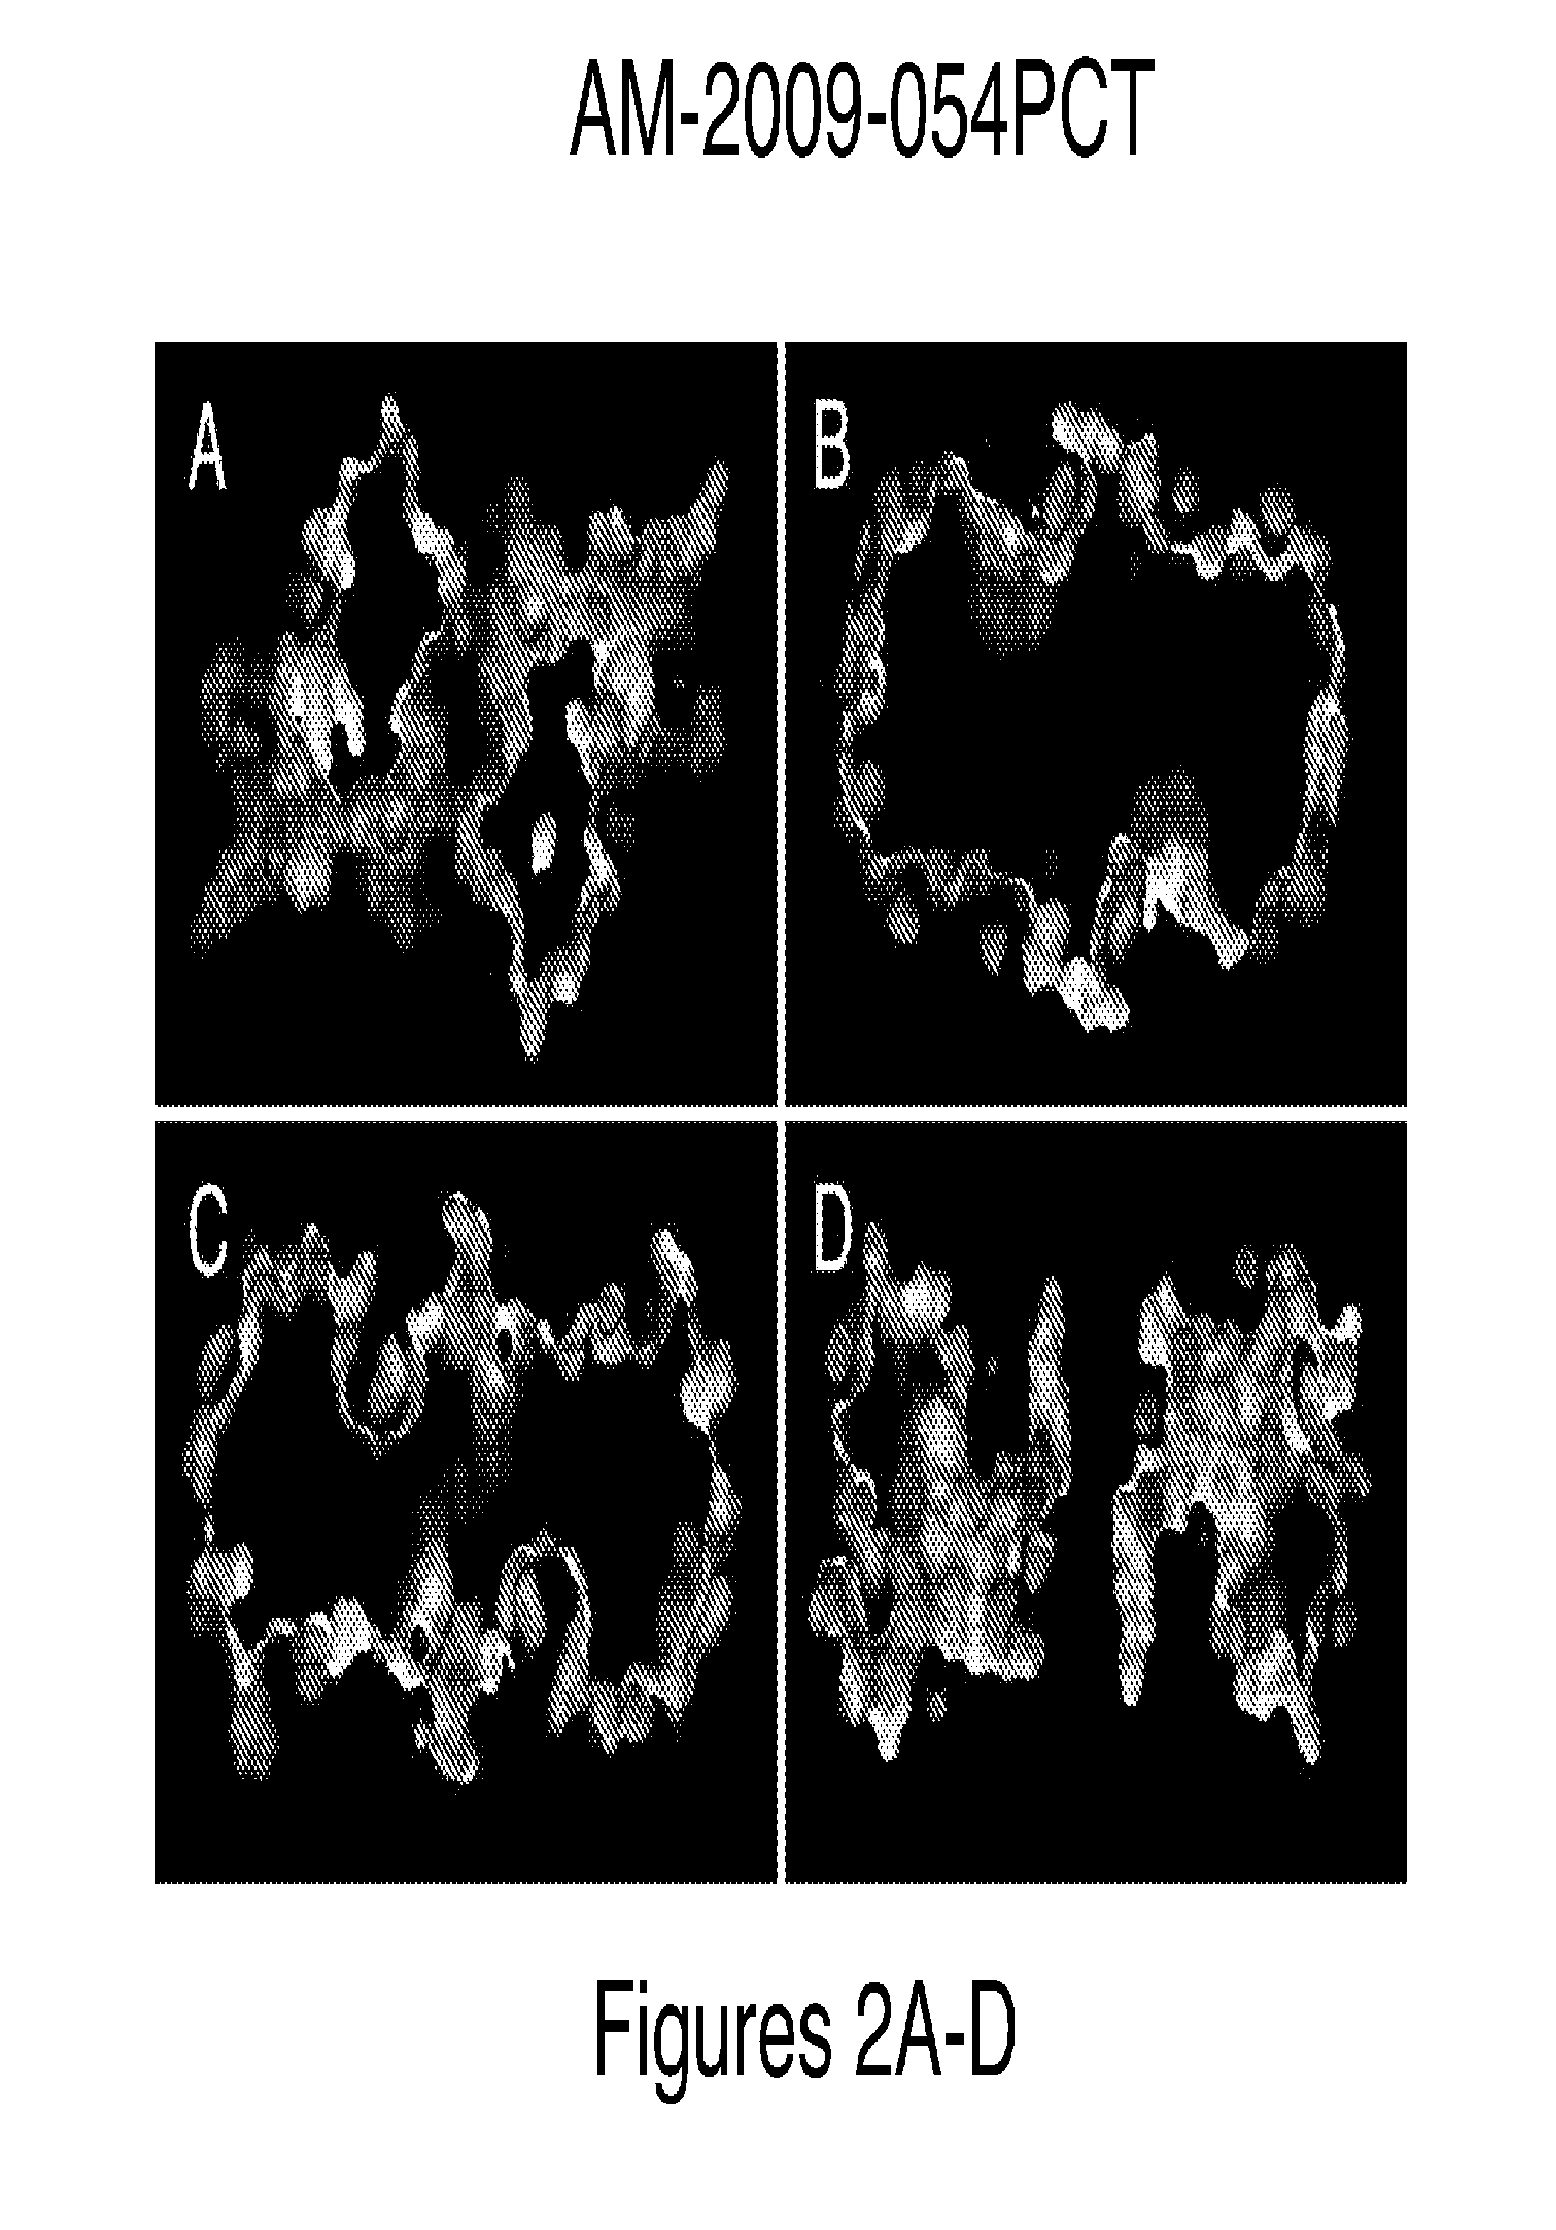 Method for binding site identification by molecular dynamics simulation (silcs: site identification by ligand competitive saturation)